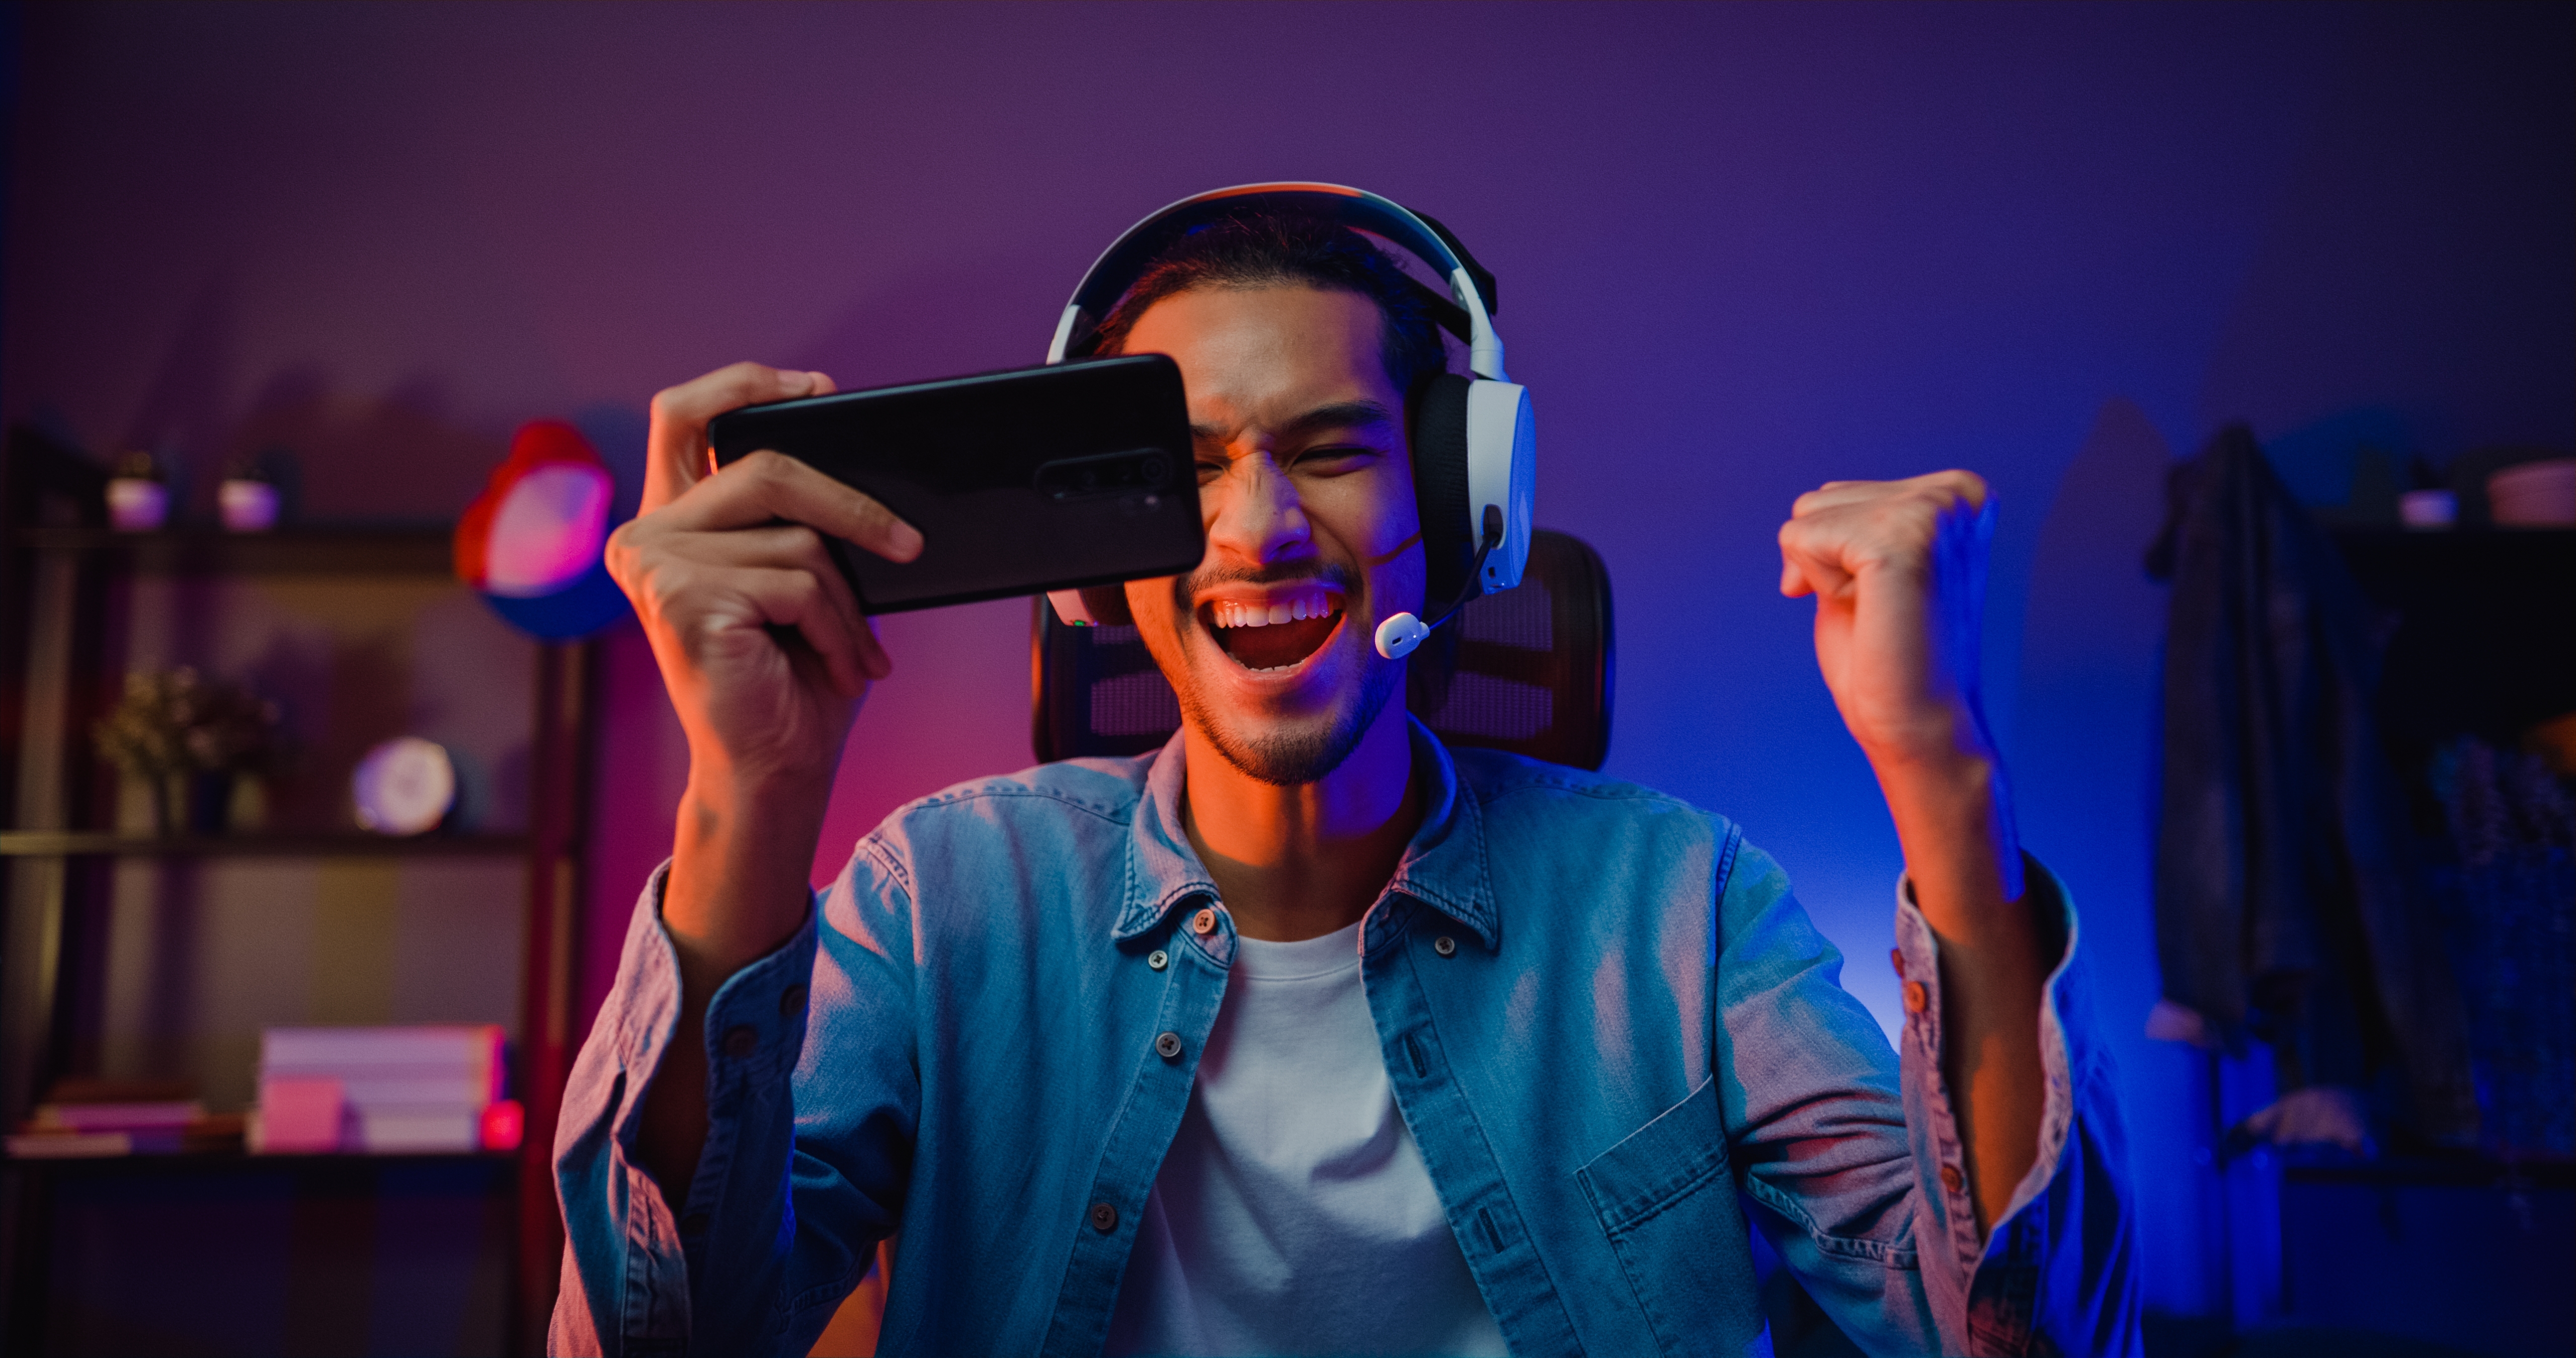 A happy man playing an online game | Source: Shutterstock